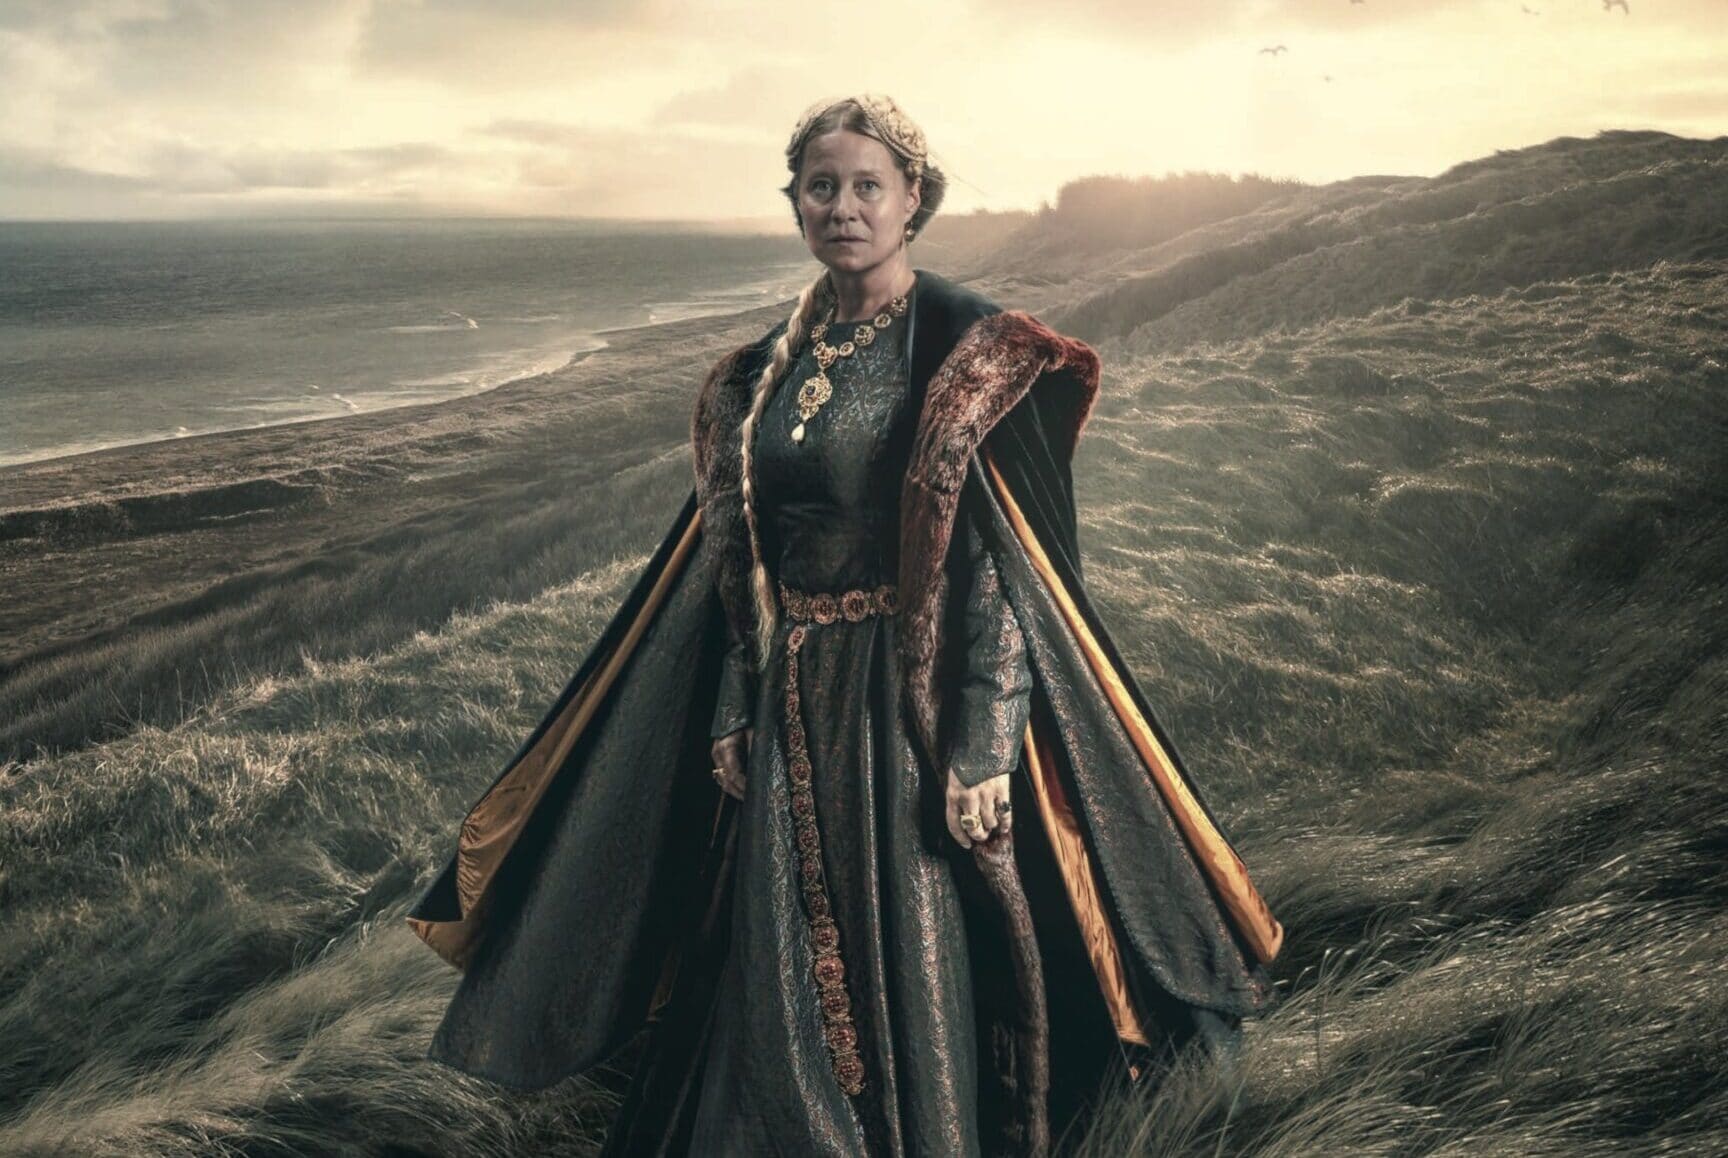 Press release: Trailer and poster released for MARGRETE – QUEEN OF THE NORTH starring Trine Dyrholm